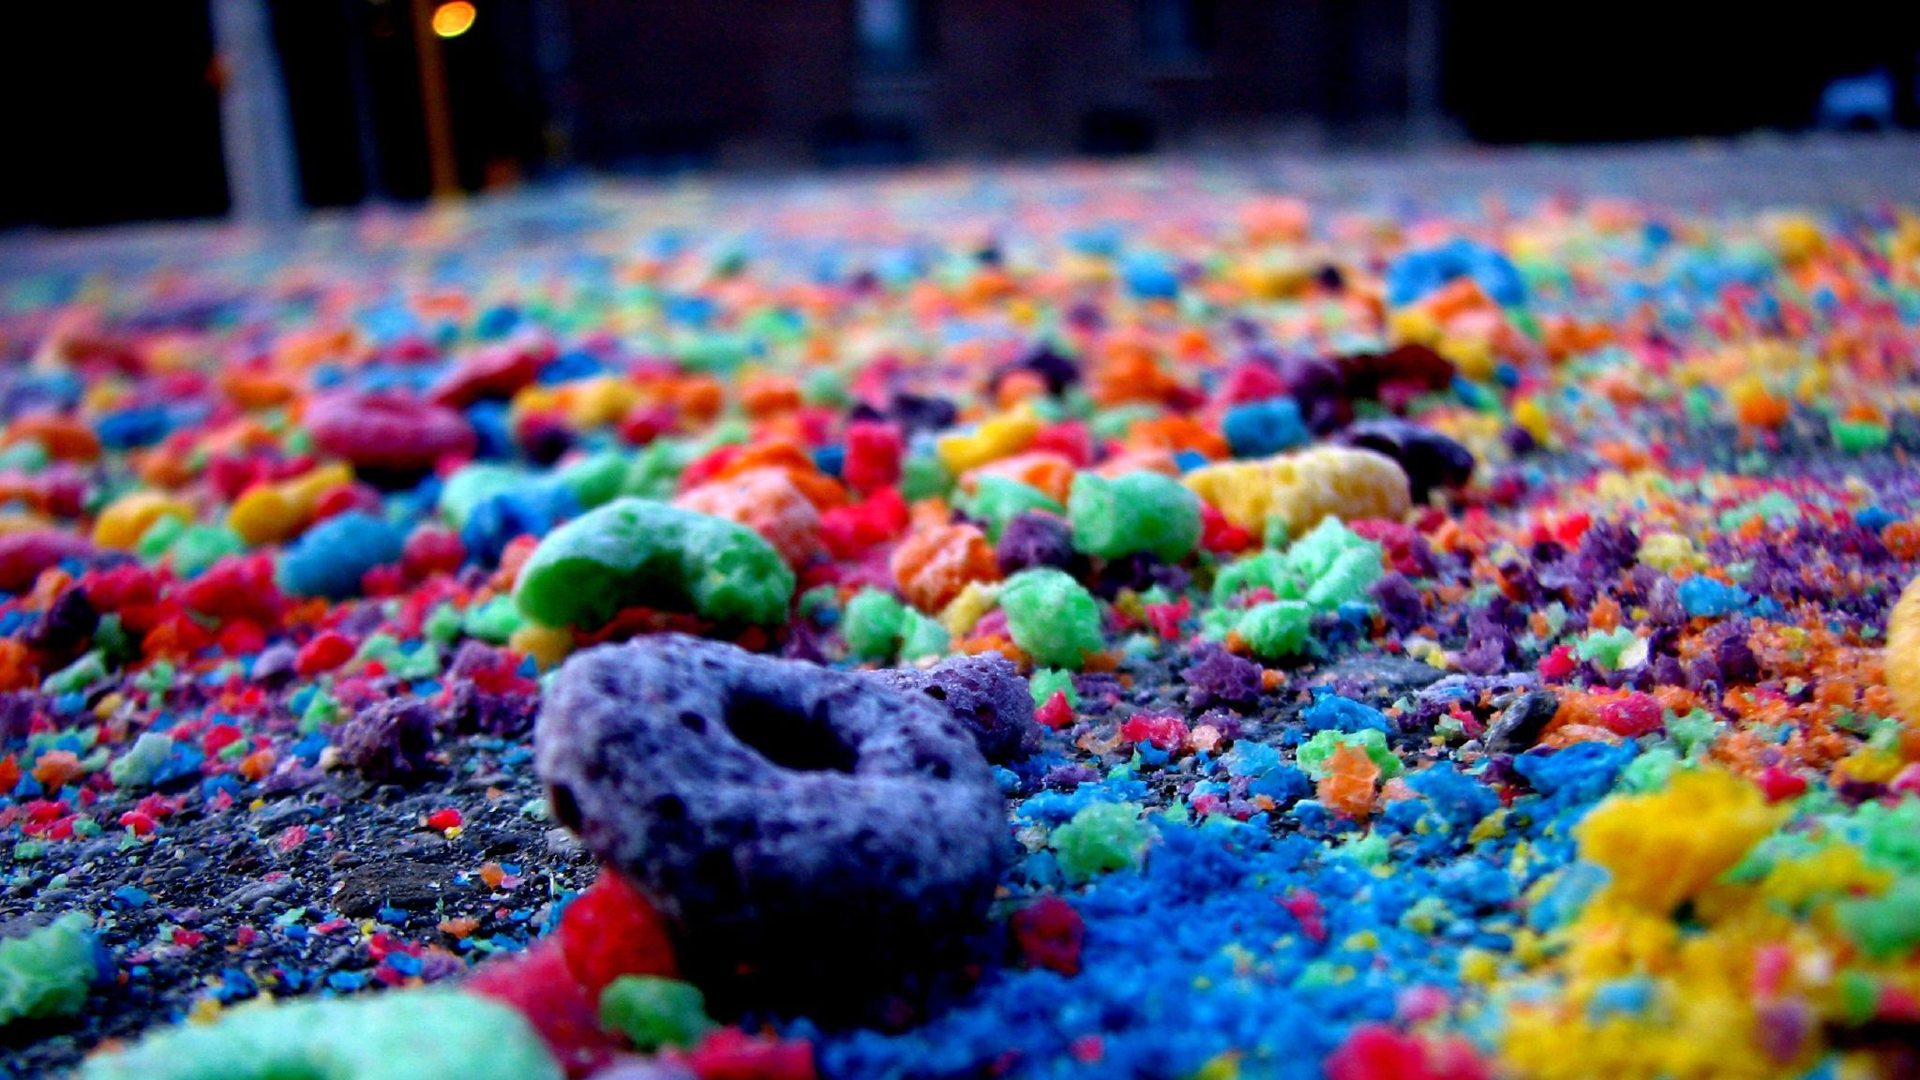 Colorful Candy Crush HD Wallpaper